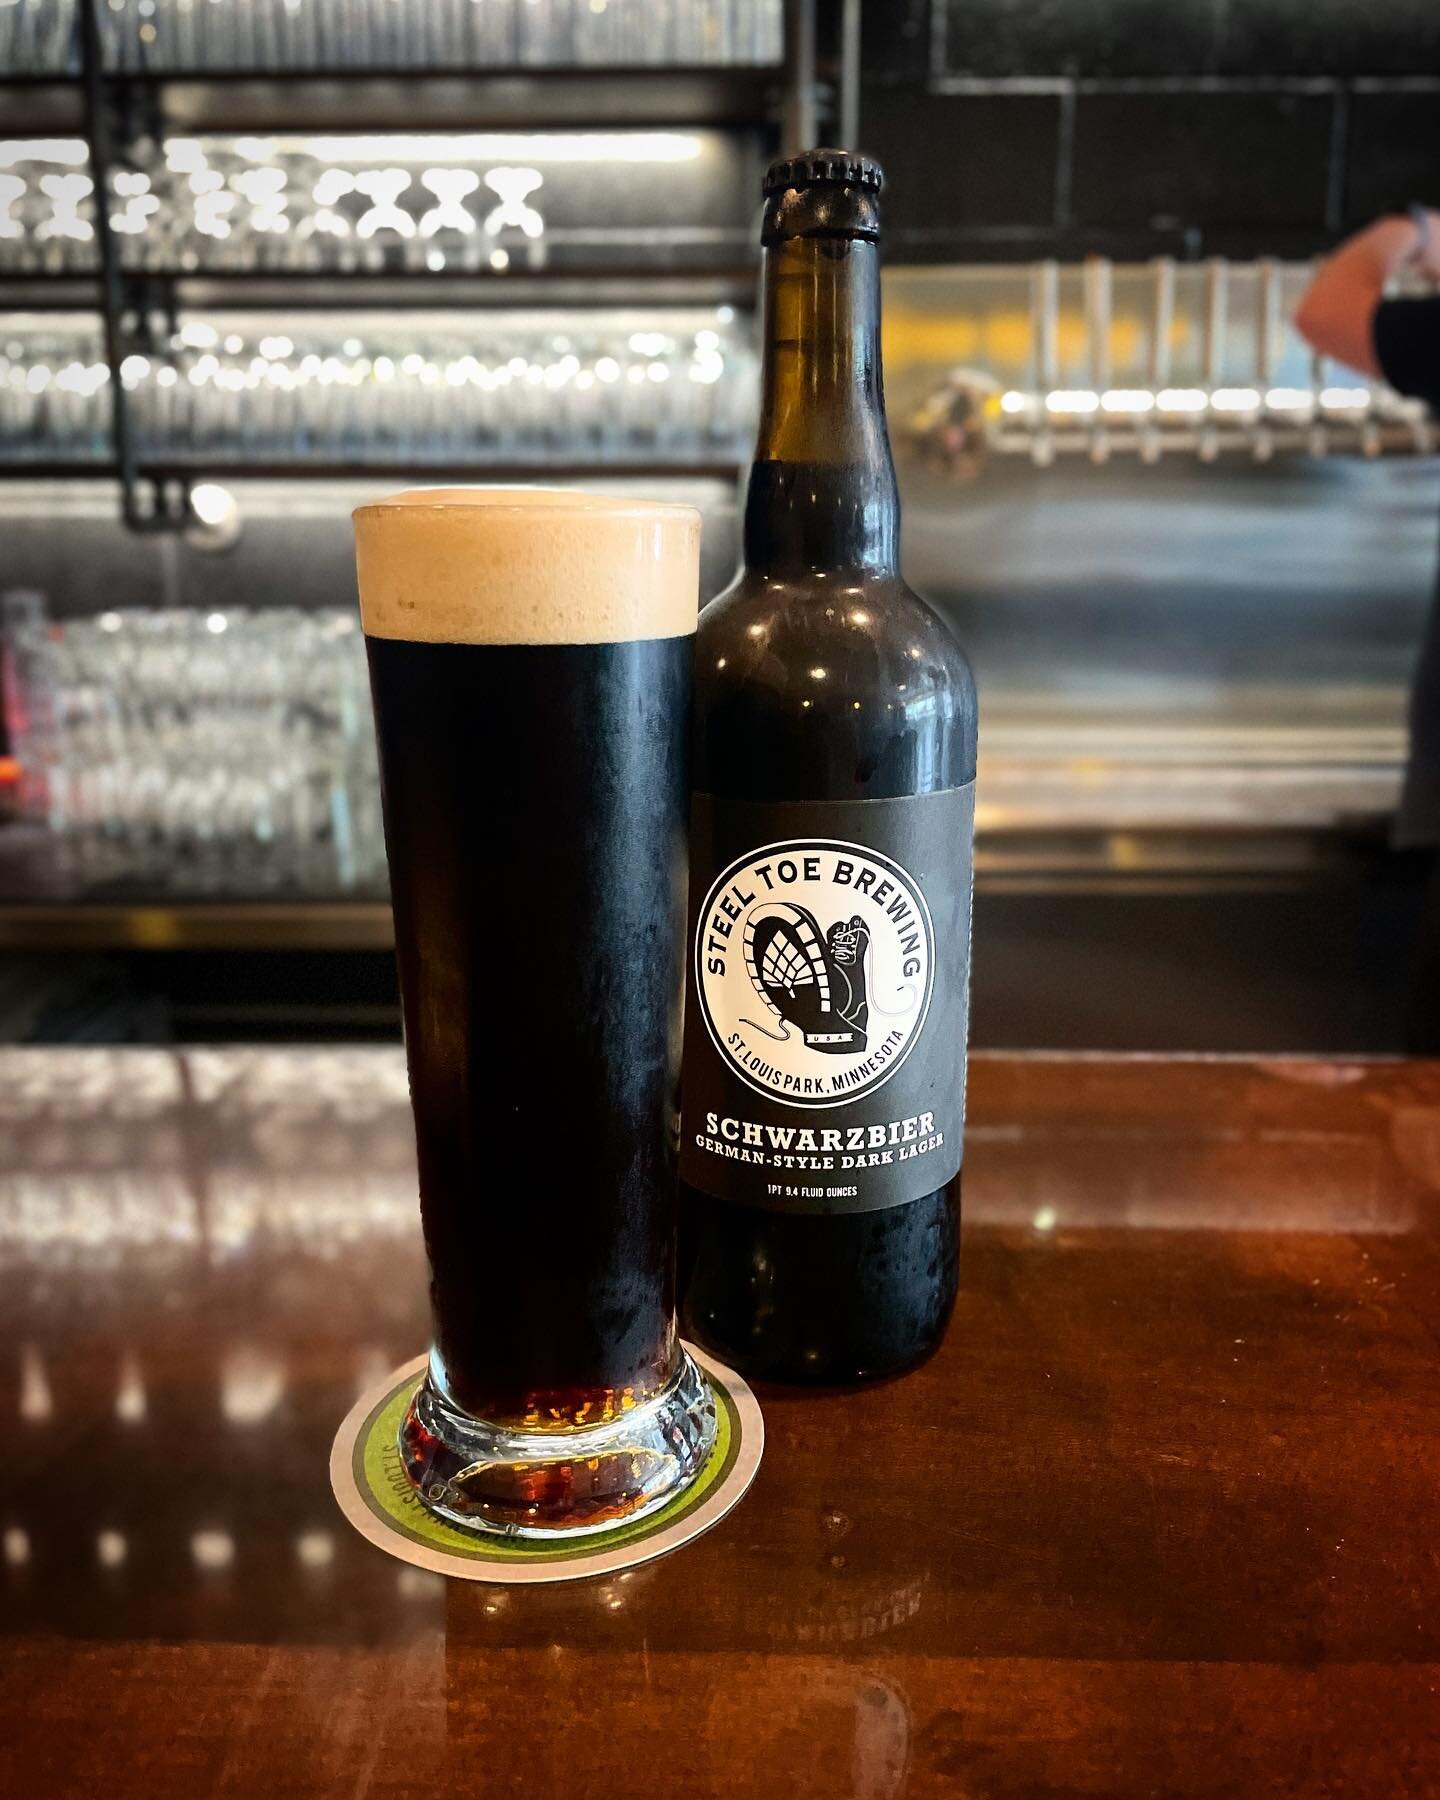 ⚫️🍺 A dark beer favorite returns!Schwarzbier German-Style Dark Lager is back today!🍻🥾

Black in color with an aroma of roasted cacao and floral hops. With flavors of dark chocolate, mild coffee, it ends with a dry crisp finish. Very mild bitternes